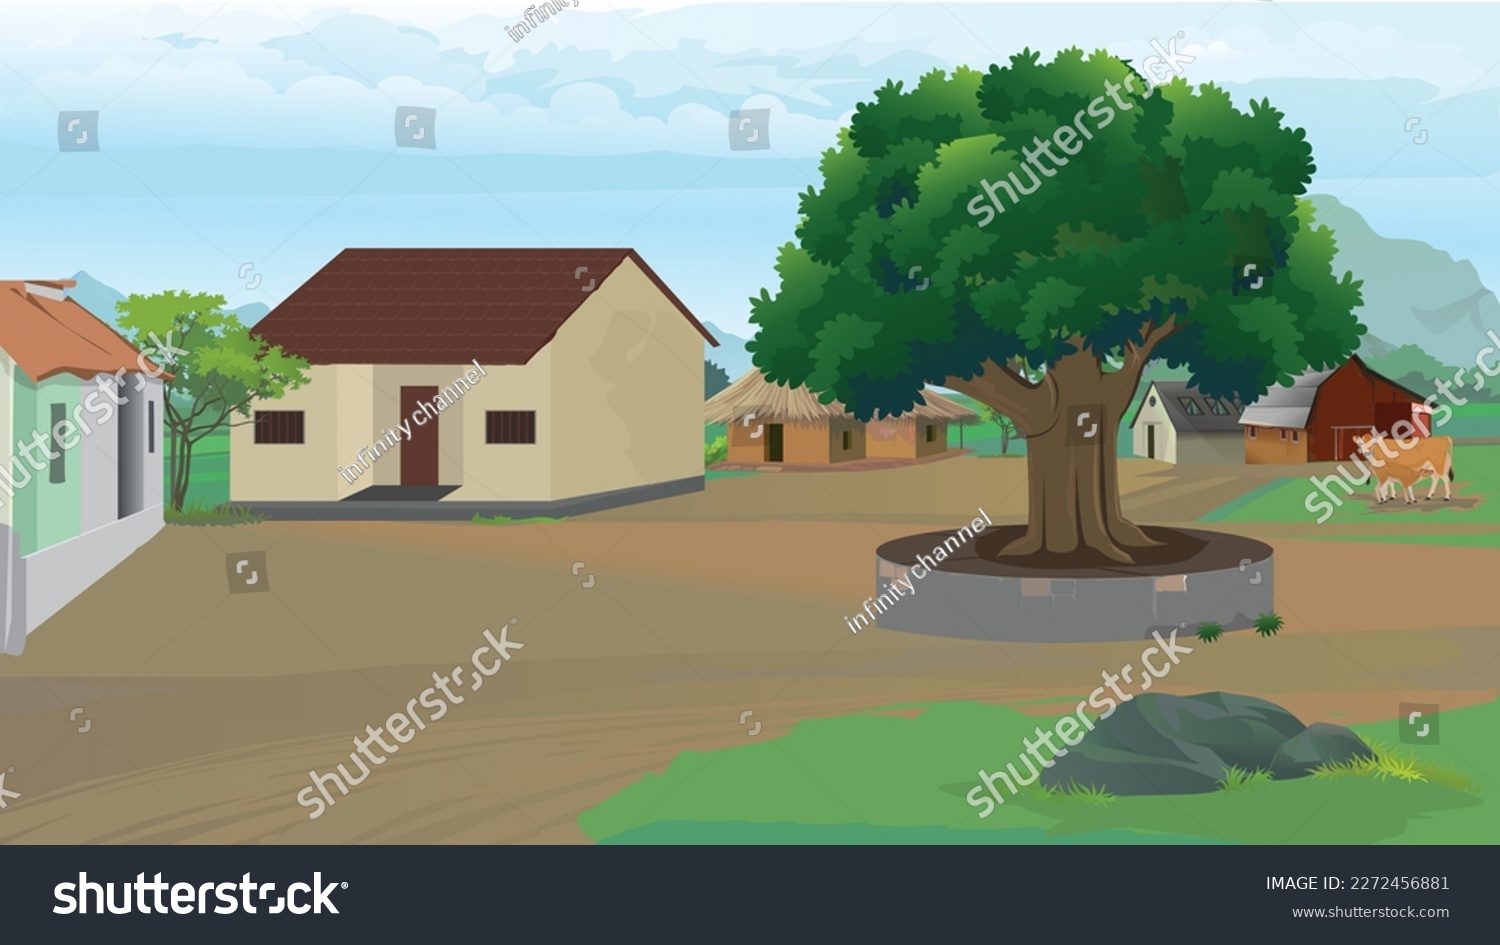 SVG of Indian Village Illustration, a village surrounded by mountains and banyan trees, cow, village meeting svg